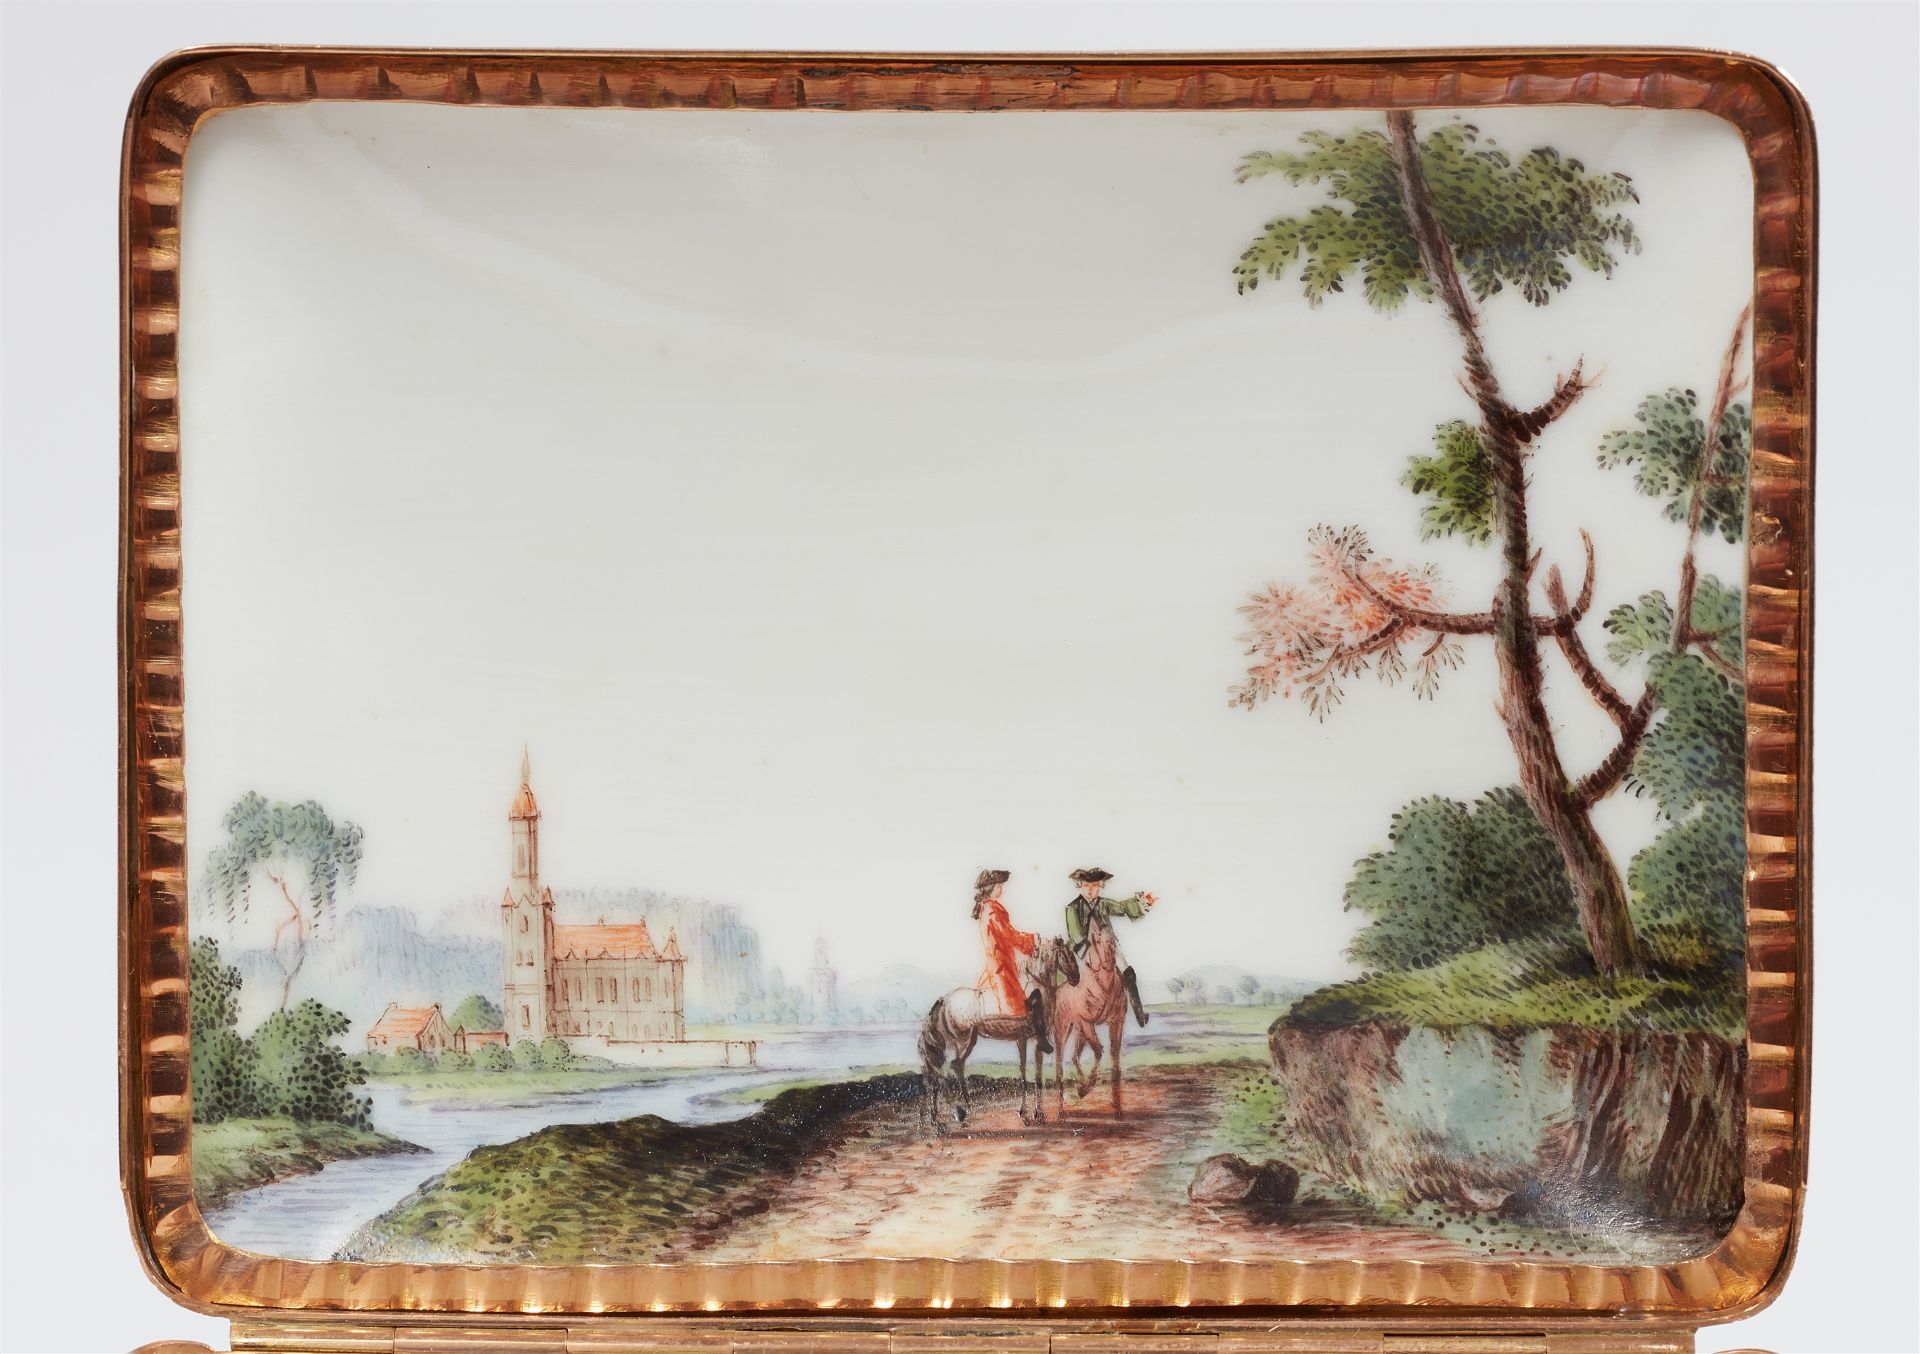 A Meissen porcelain snuff box with landscapes - Image 7 of 9